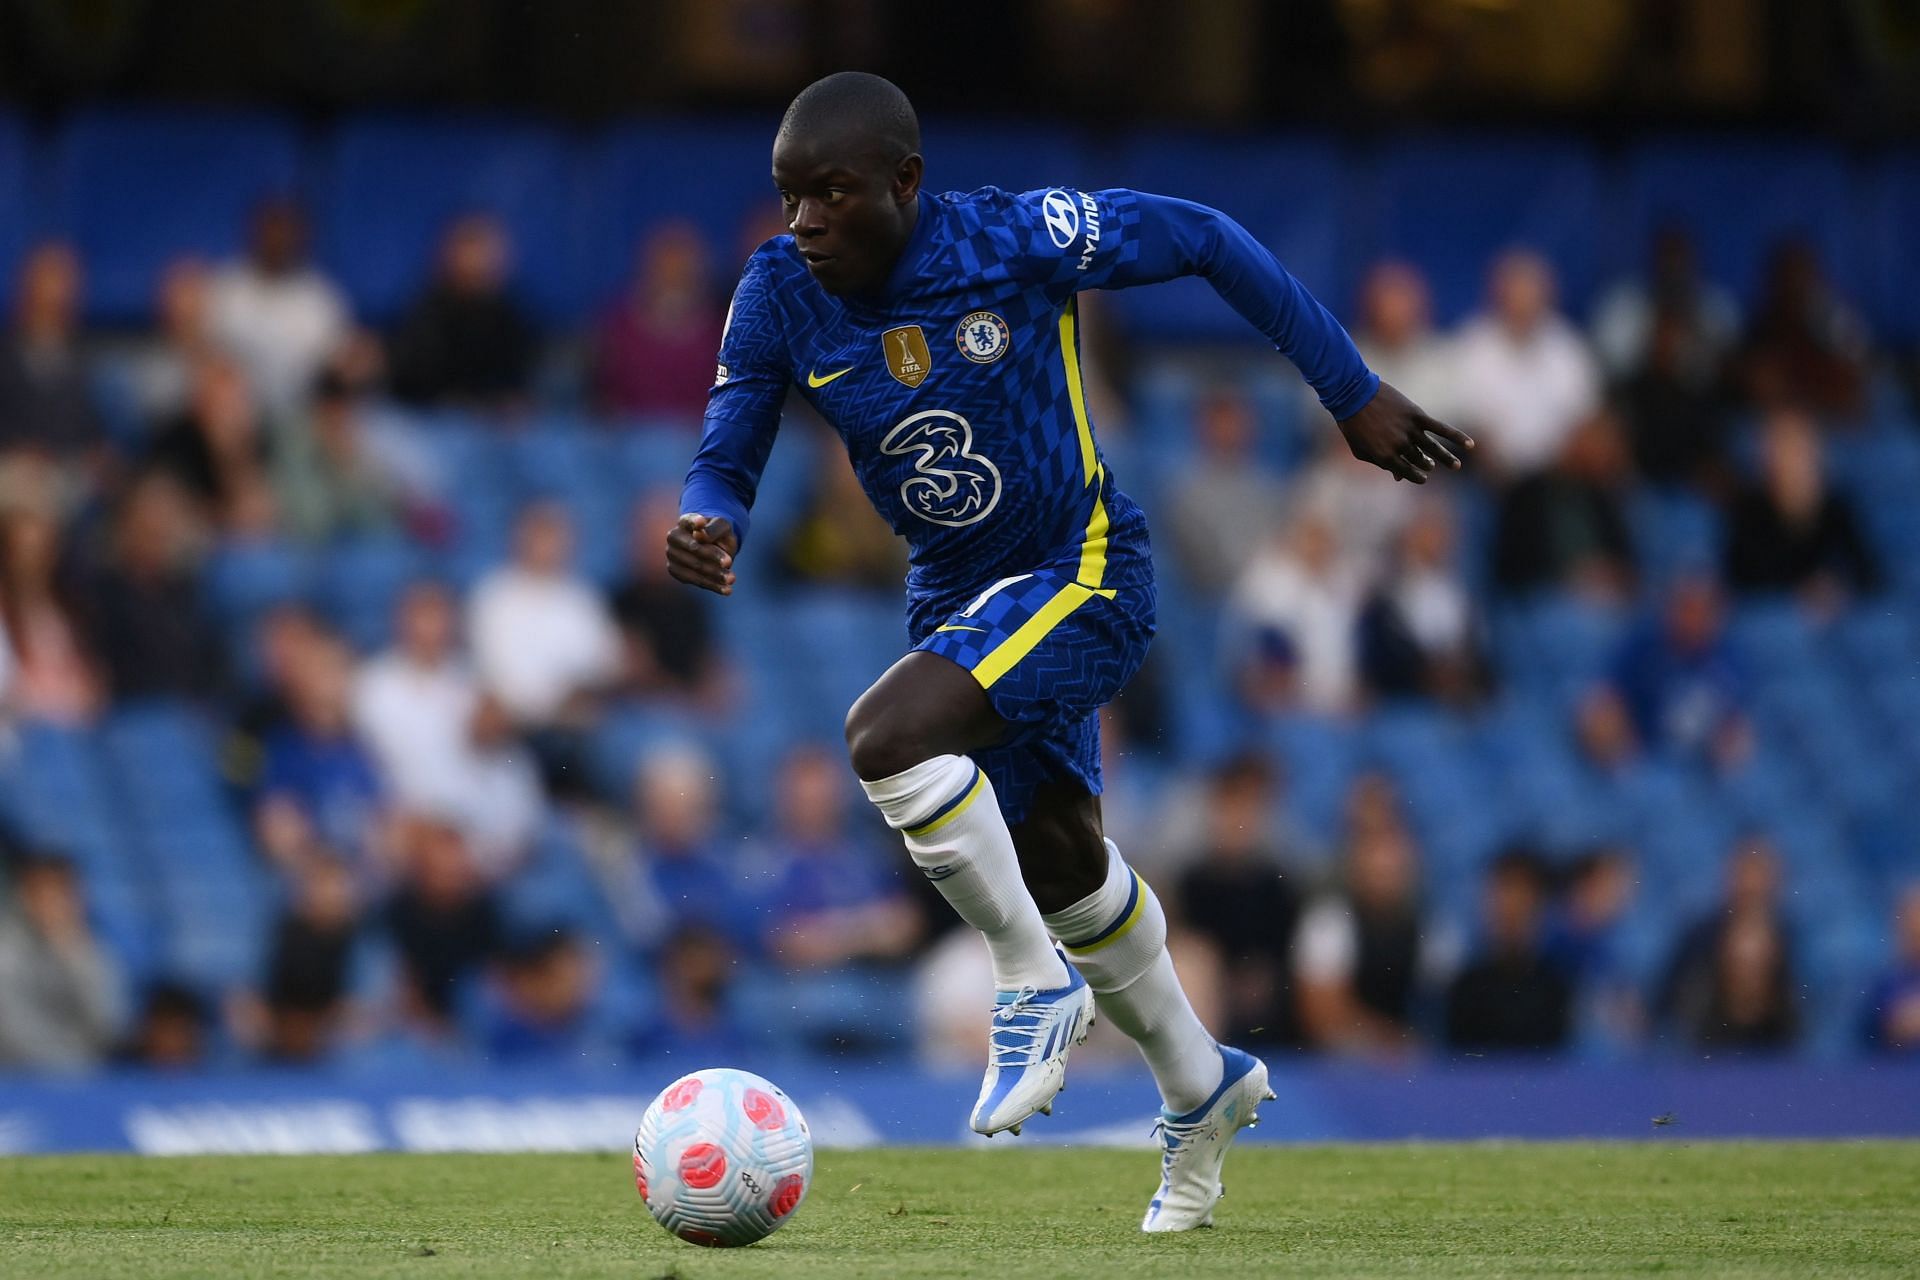 Kante joined the Blues from Leicester City in 2016